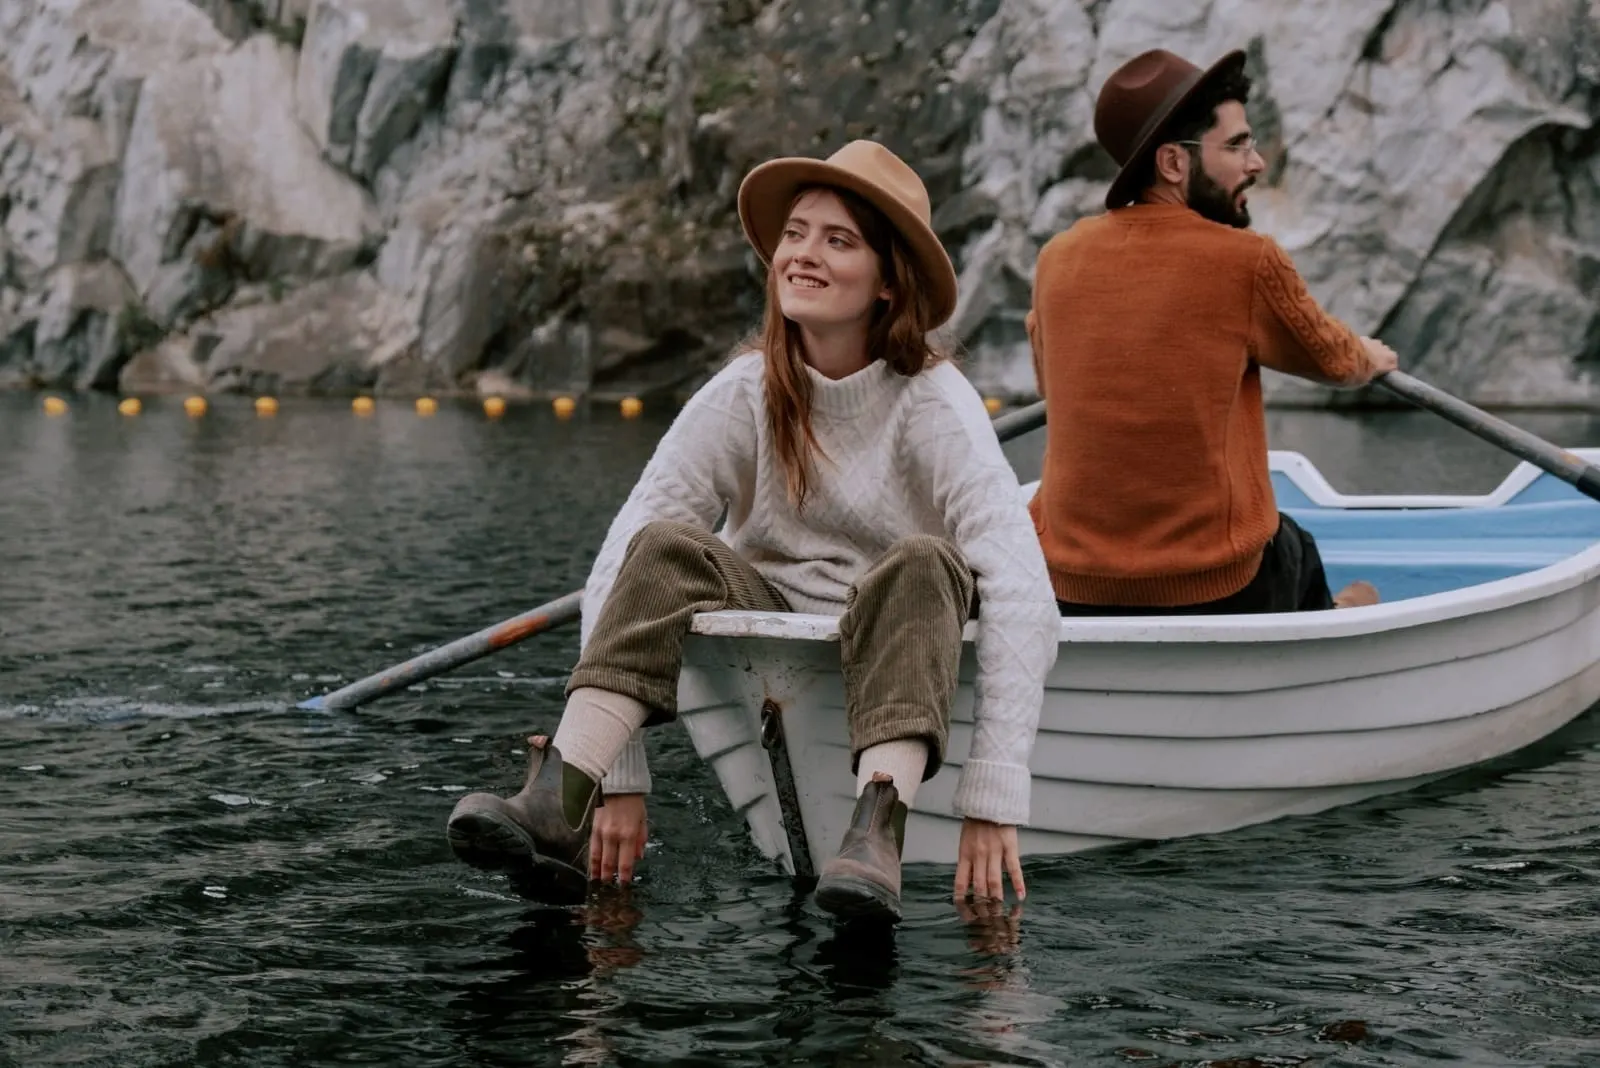 man and woman with hats sitting on boat